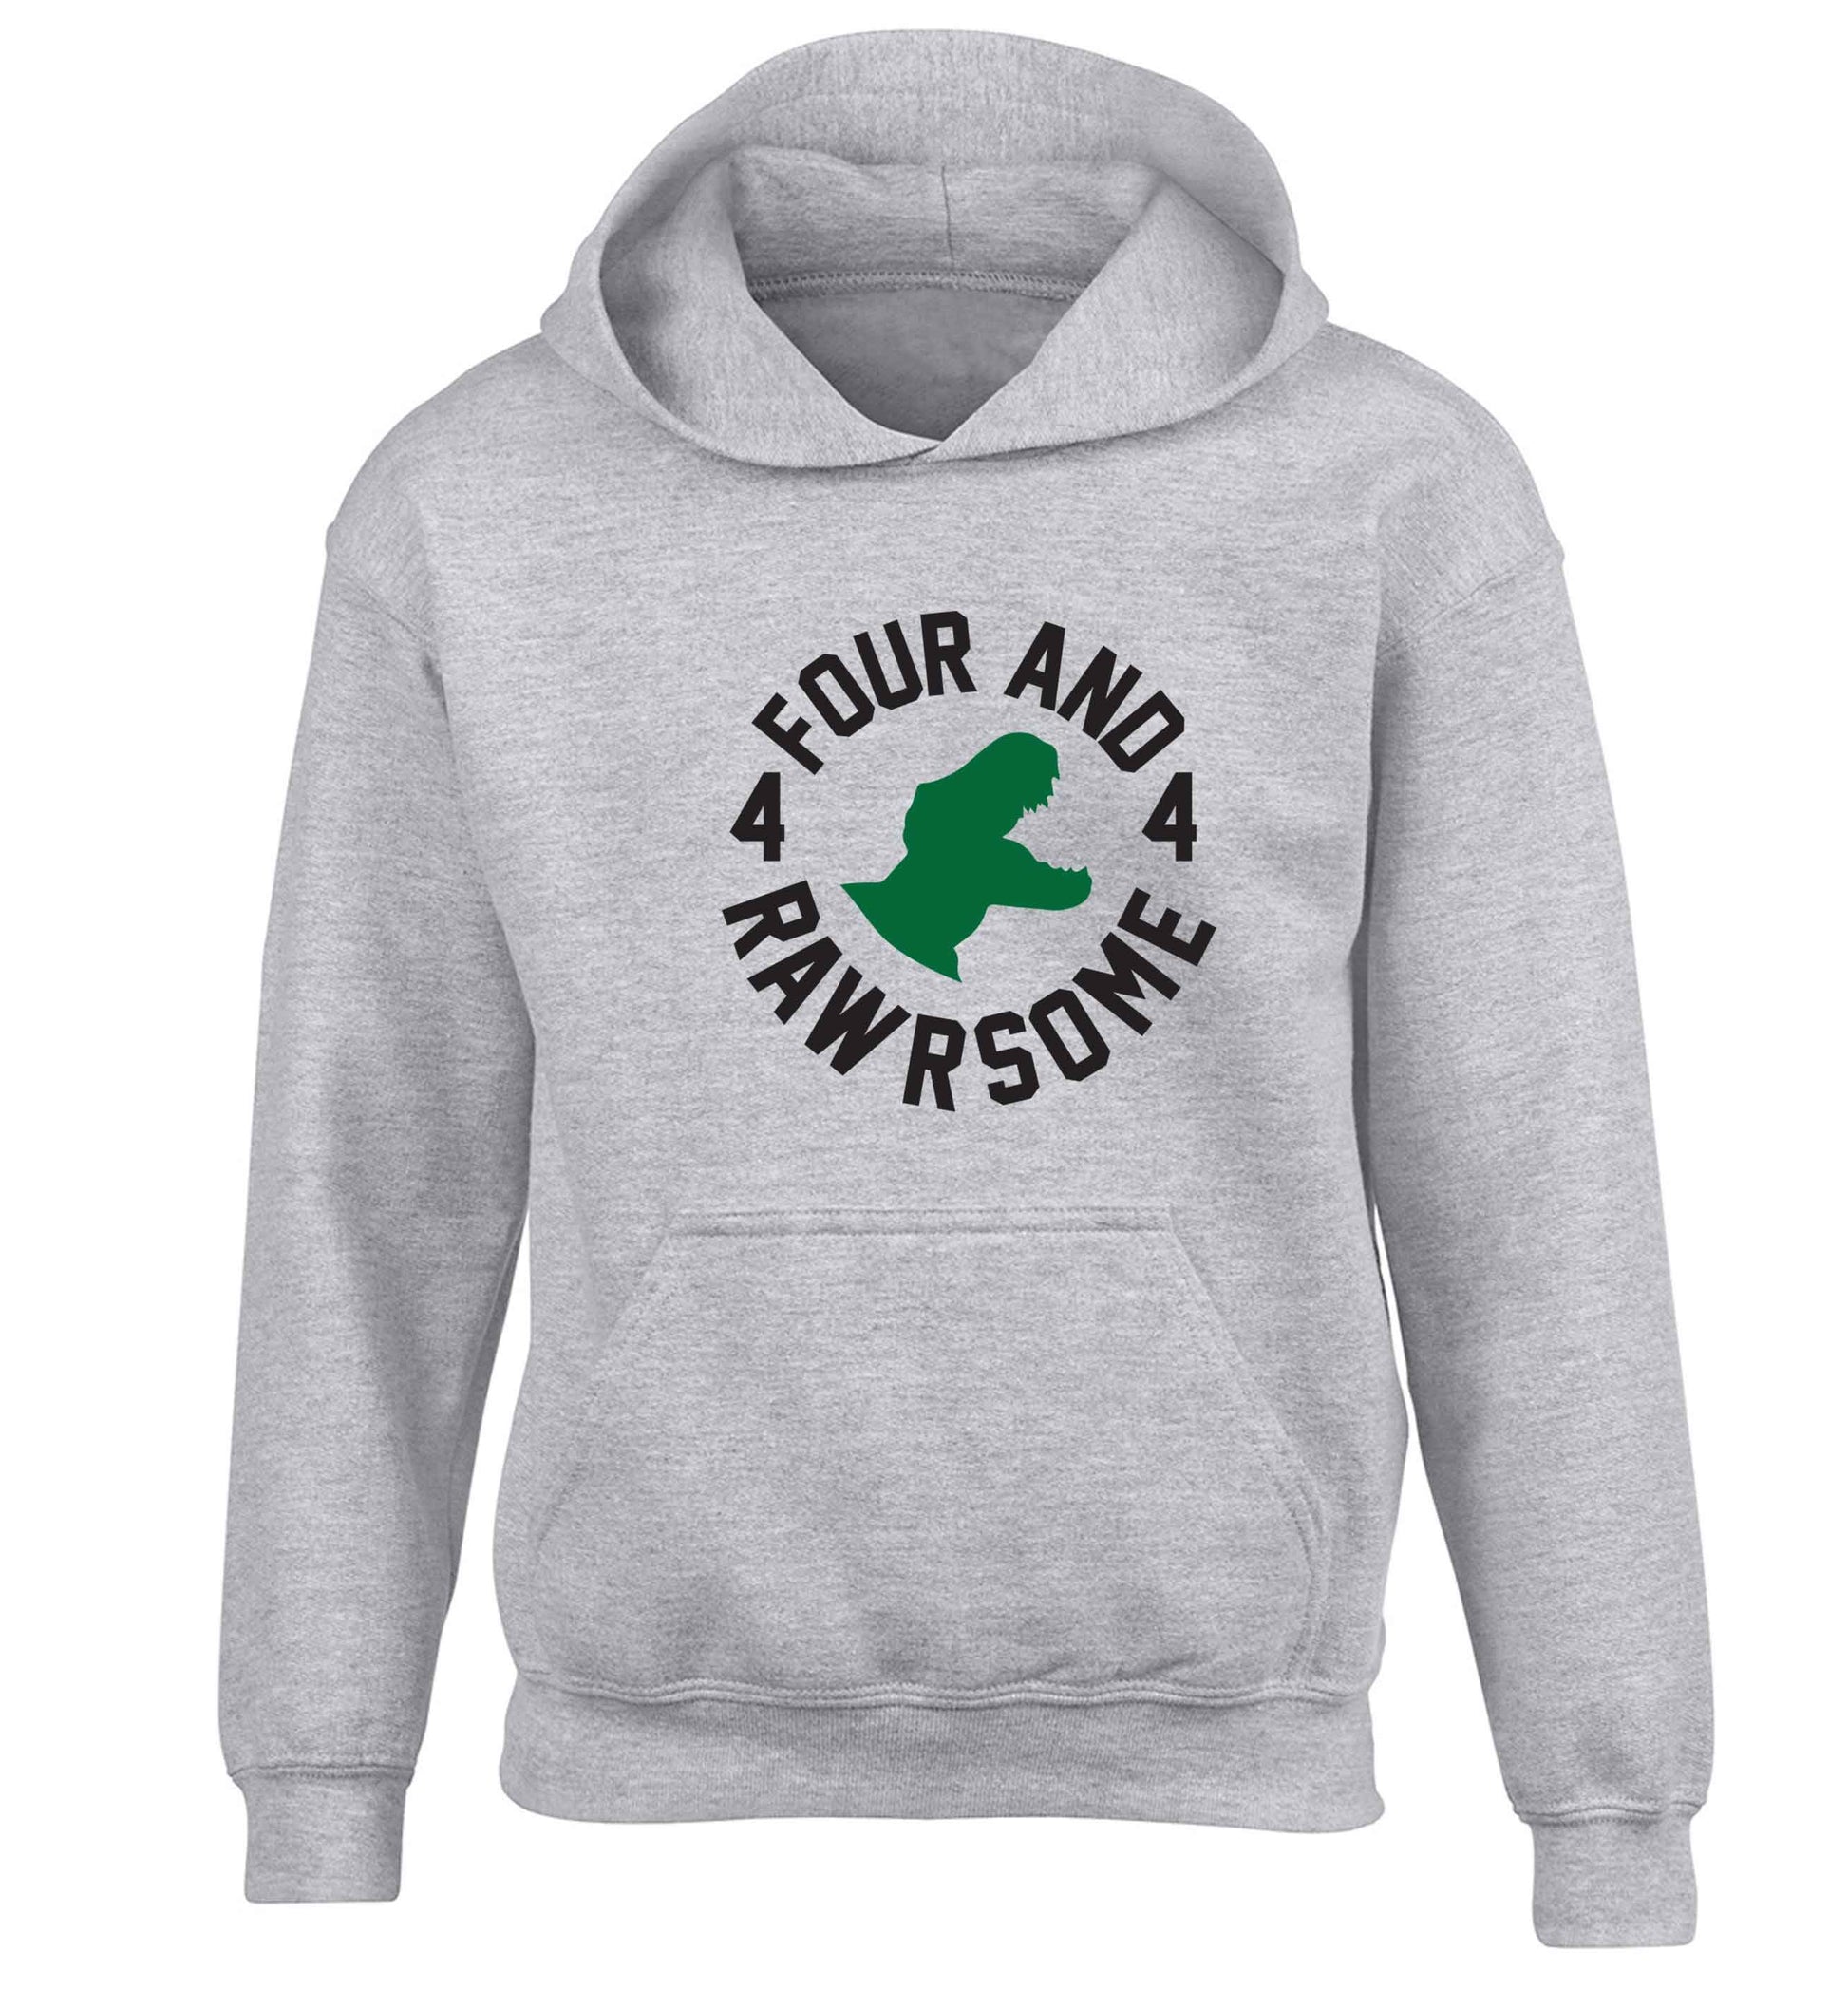 Four and rawrsome children's grey hoodie 12-13 Years